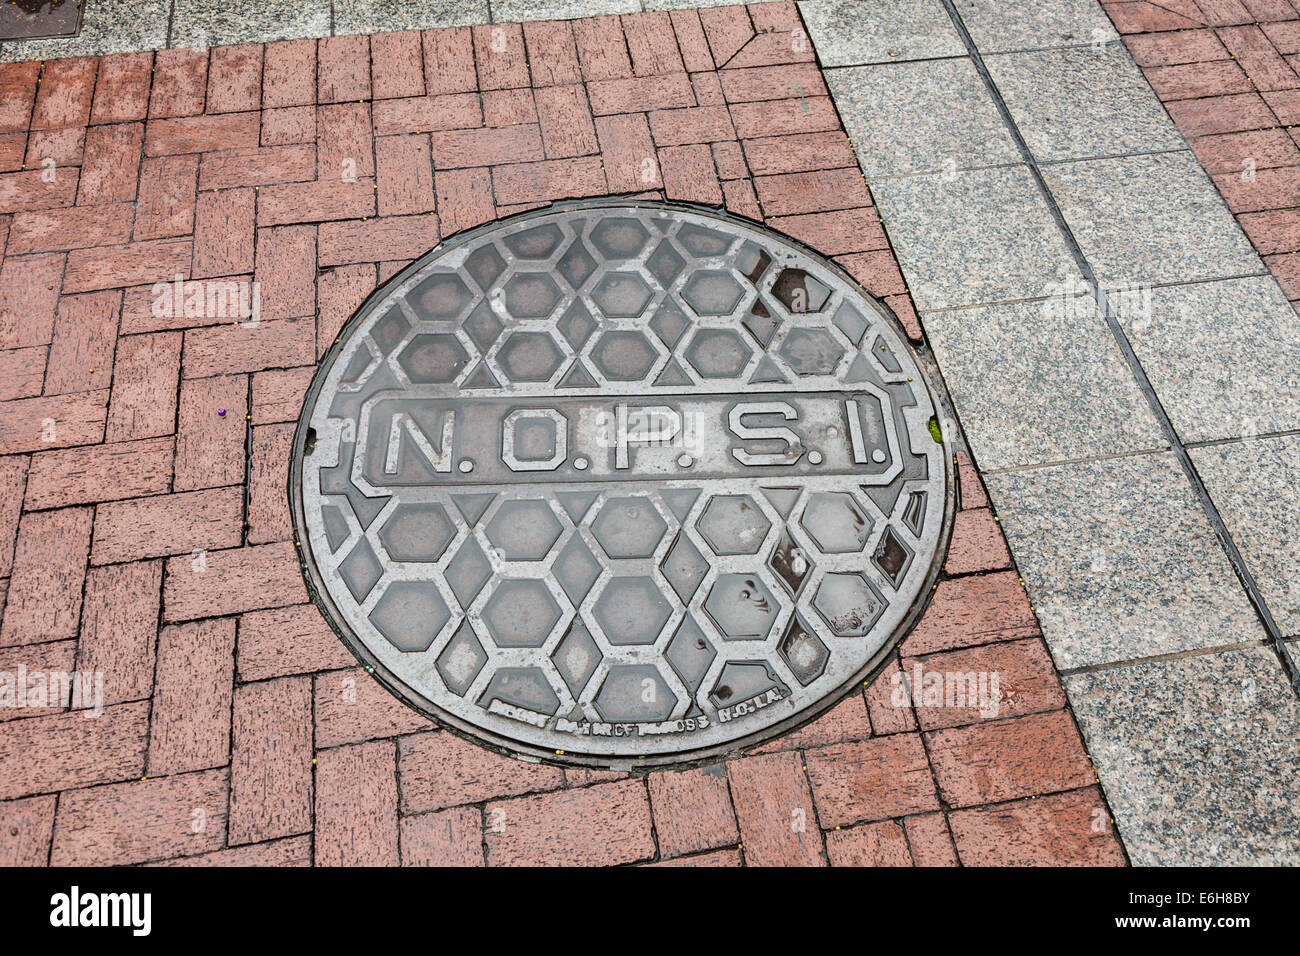 New Orleans Public Service Inc cast iron utility manhole cover on the sidewalk in New Orleans, Louisiana Stock Photo